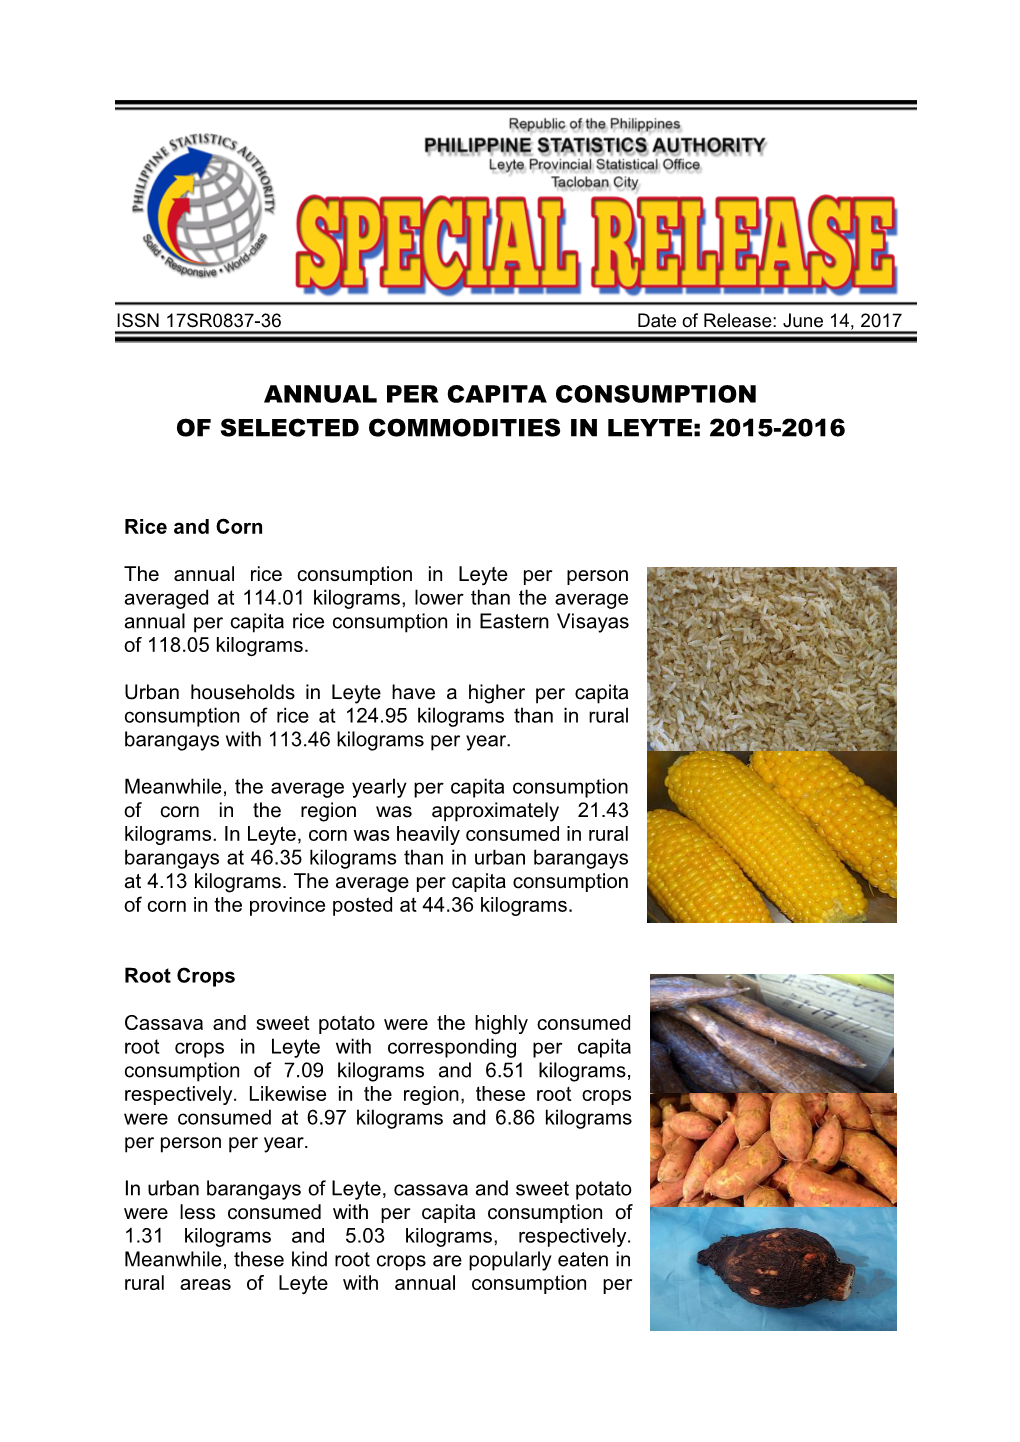 Annual Per Capita Consumption of Selected Commodities in Leyte: 2015-2016